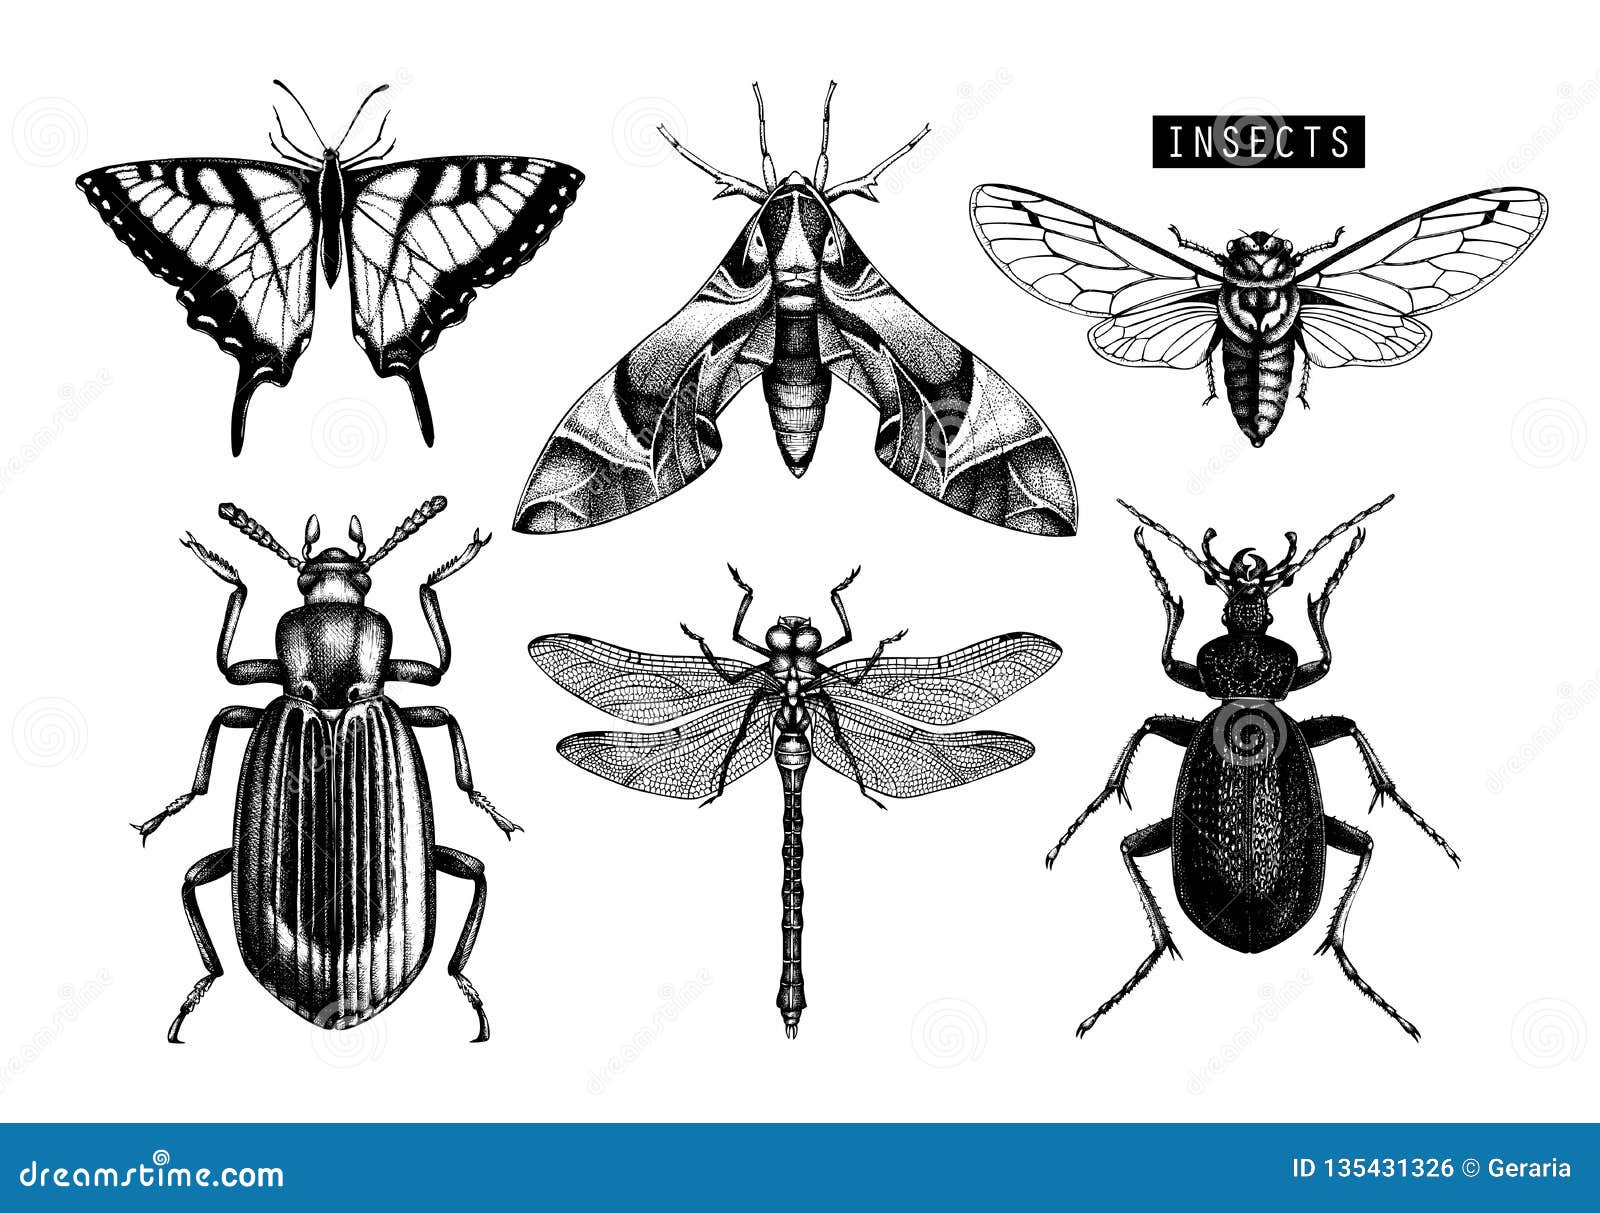  collection of hand drawn insects s. black butterflies, cicada, beetle, bug, dragonfly drawing. entomological sk